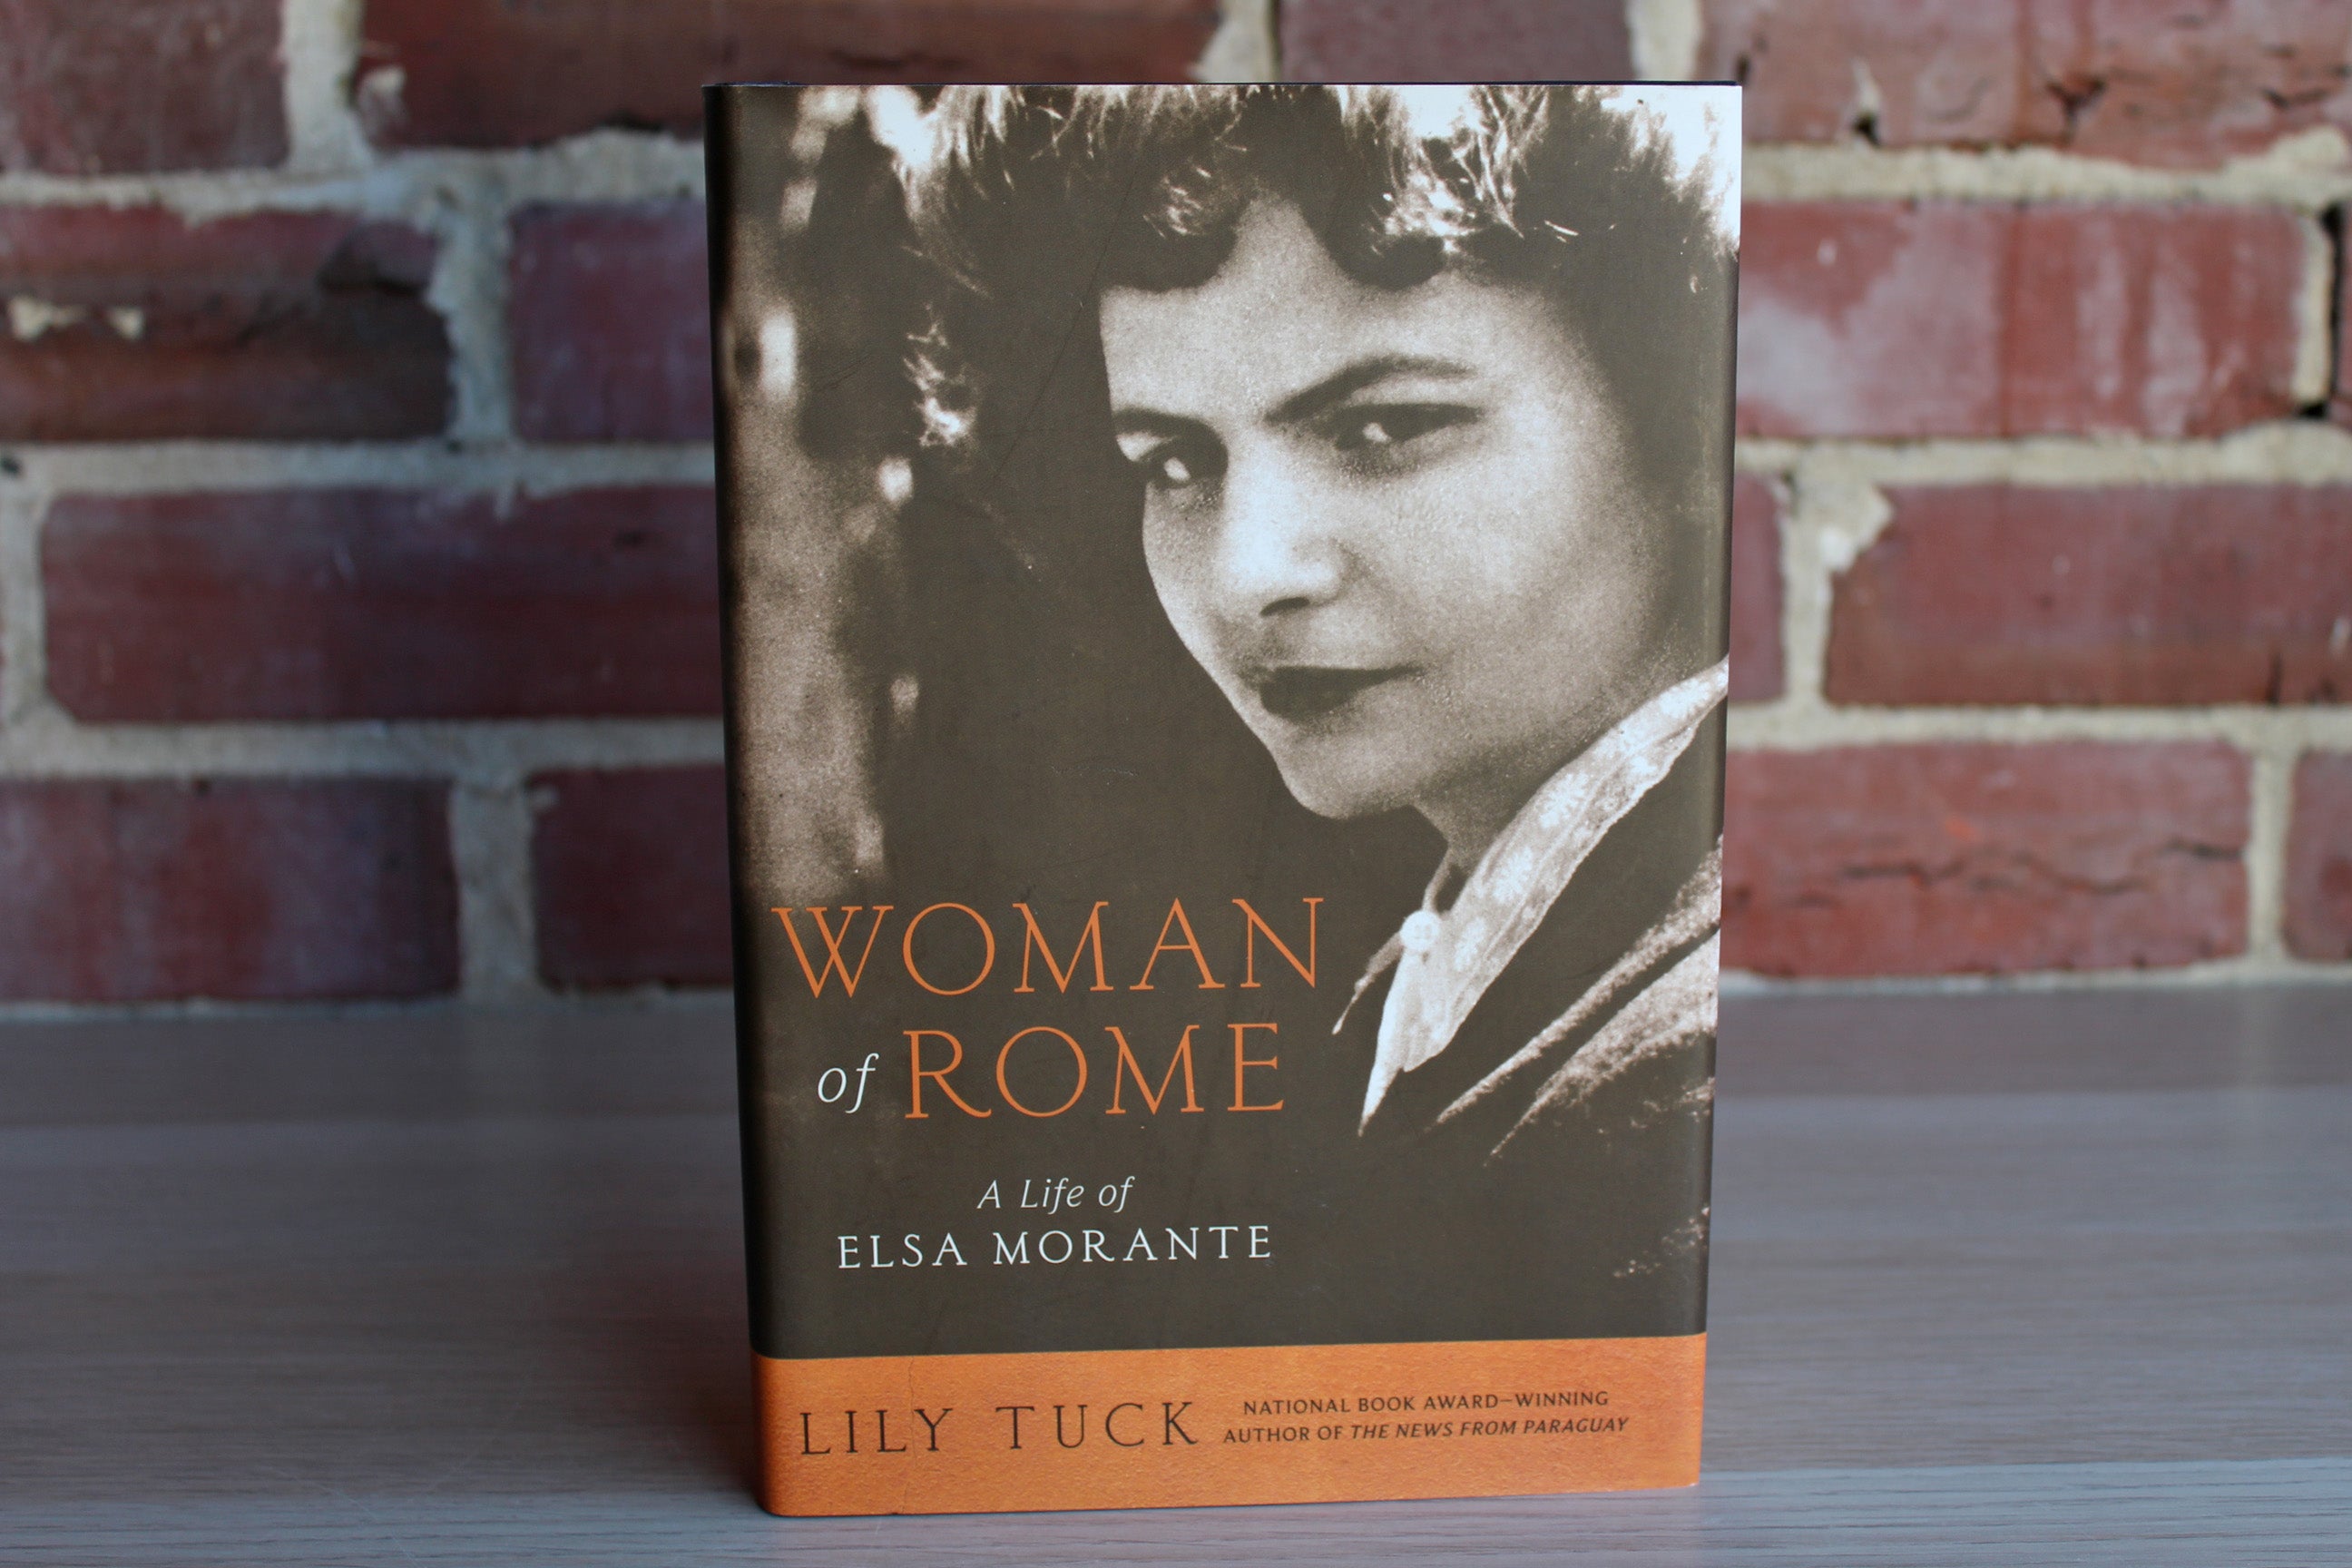 Woman of Rome A Life of Elsa Morante by Lily Tuck pic